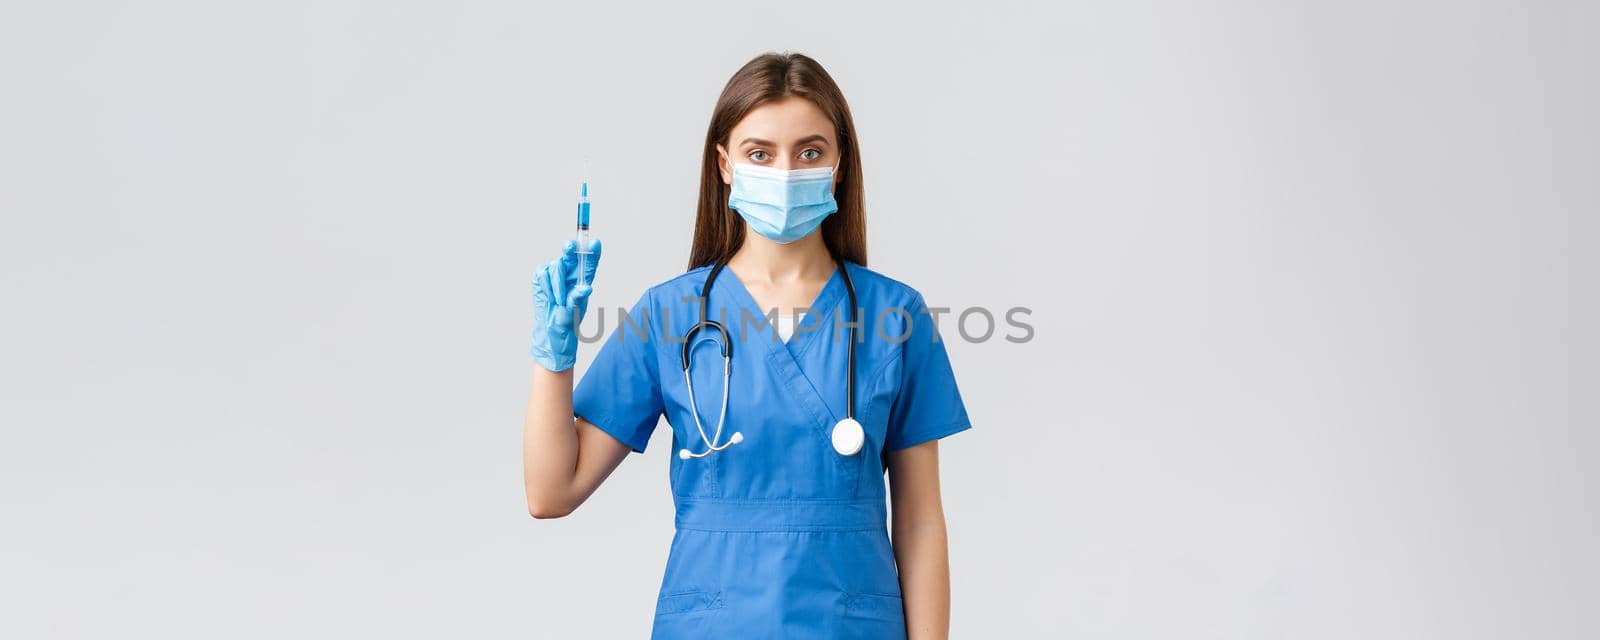 Covid-19, preventing virus, health, healthcare workers and quarantine concept. Serious female nurse in blue scrubs, doctor wearing medical mask holding syringe with coronavirus vaccine.